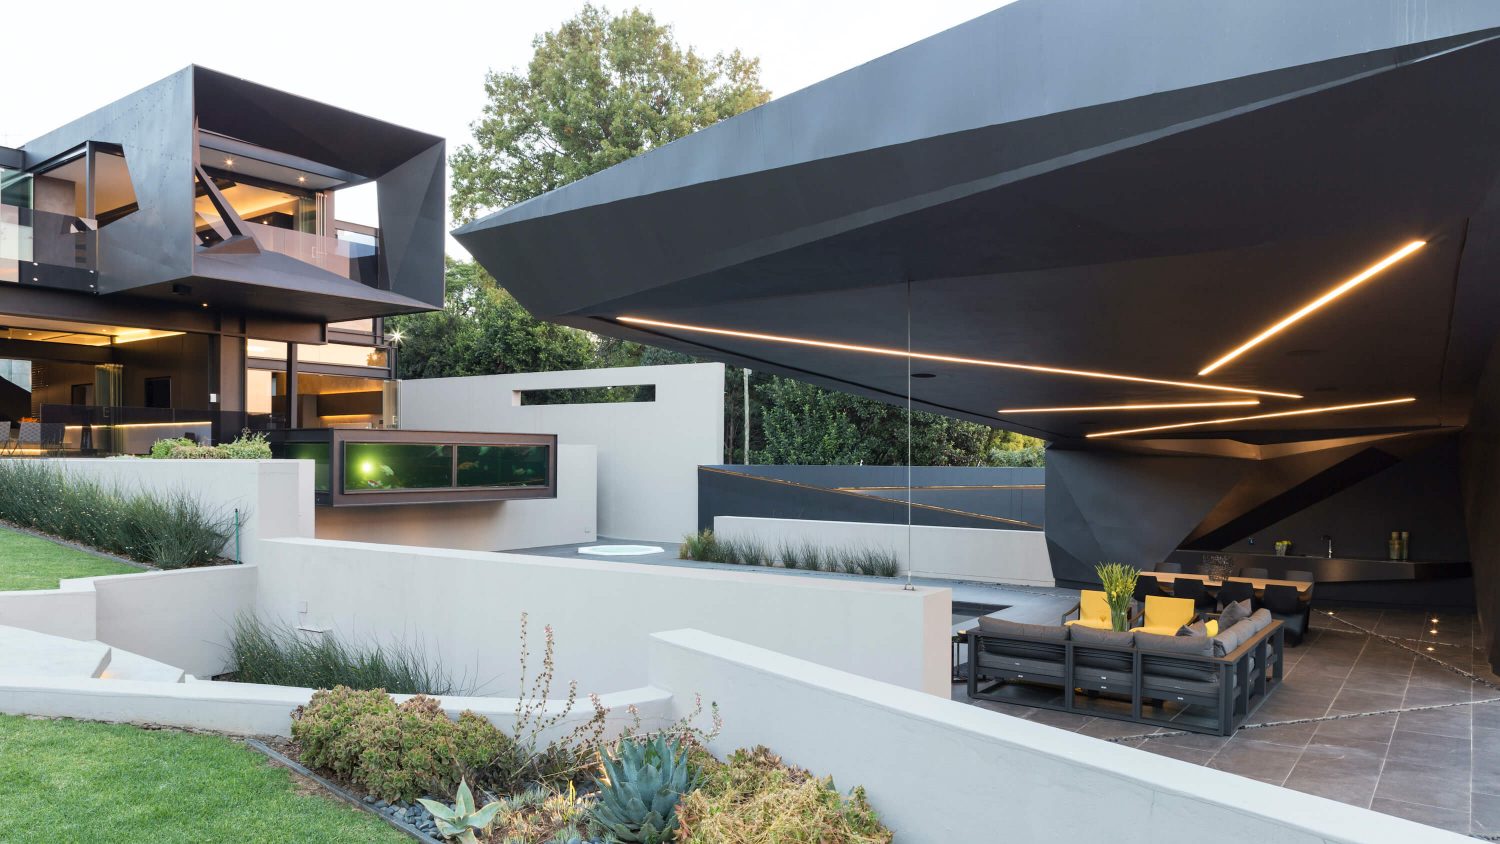 Kloof Road House by Nico van der Meulen Architects